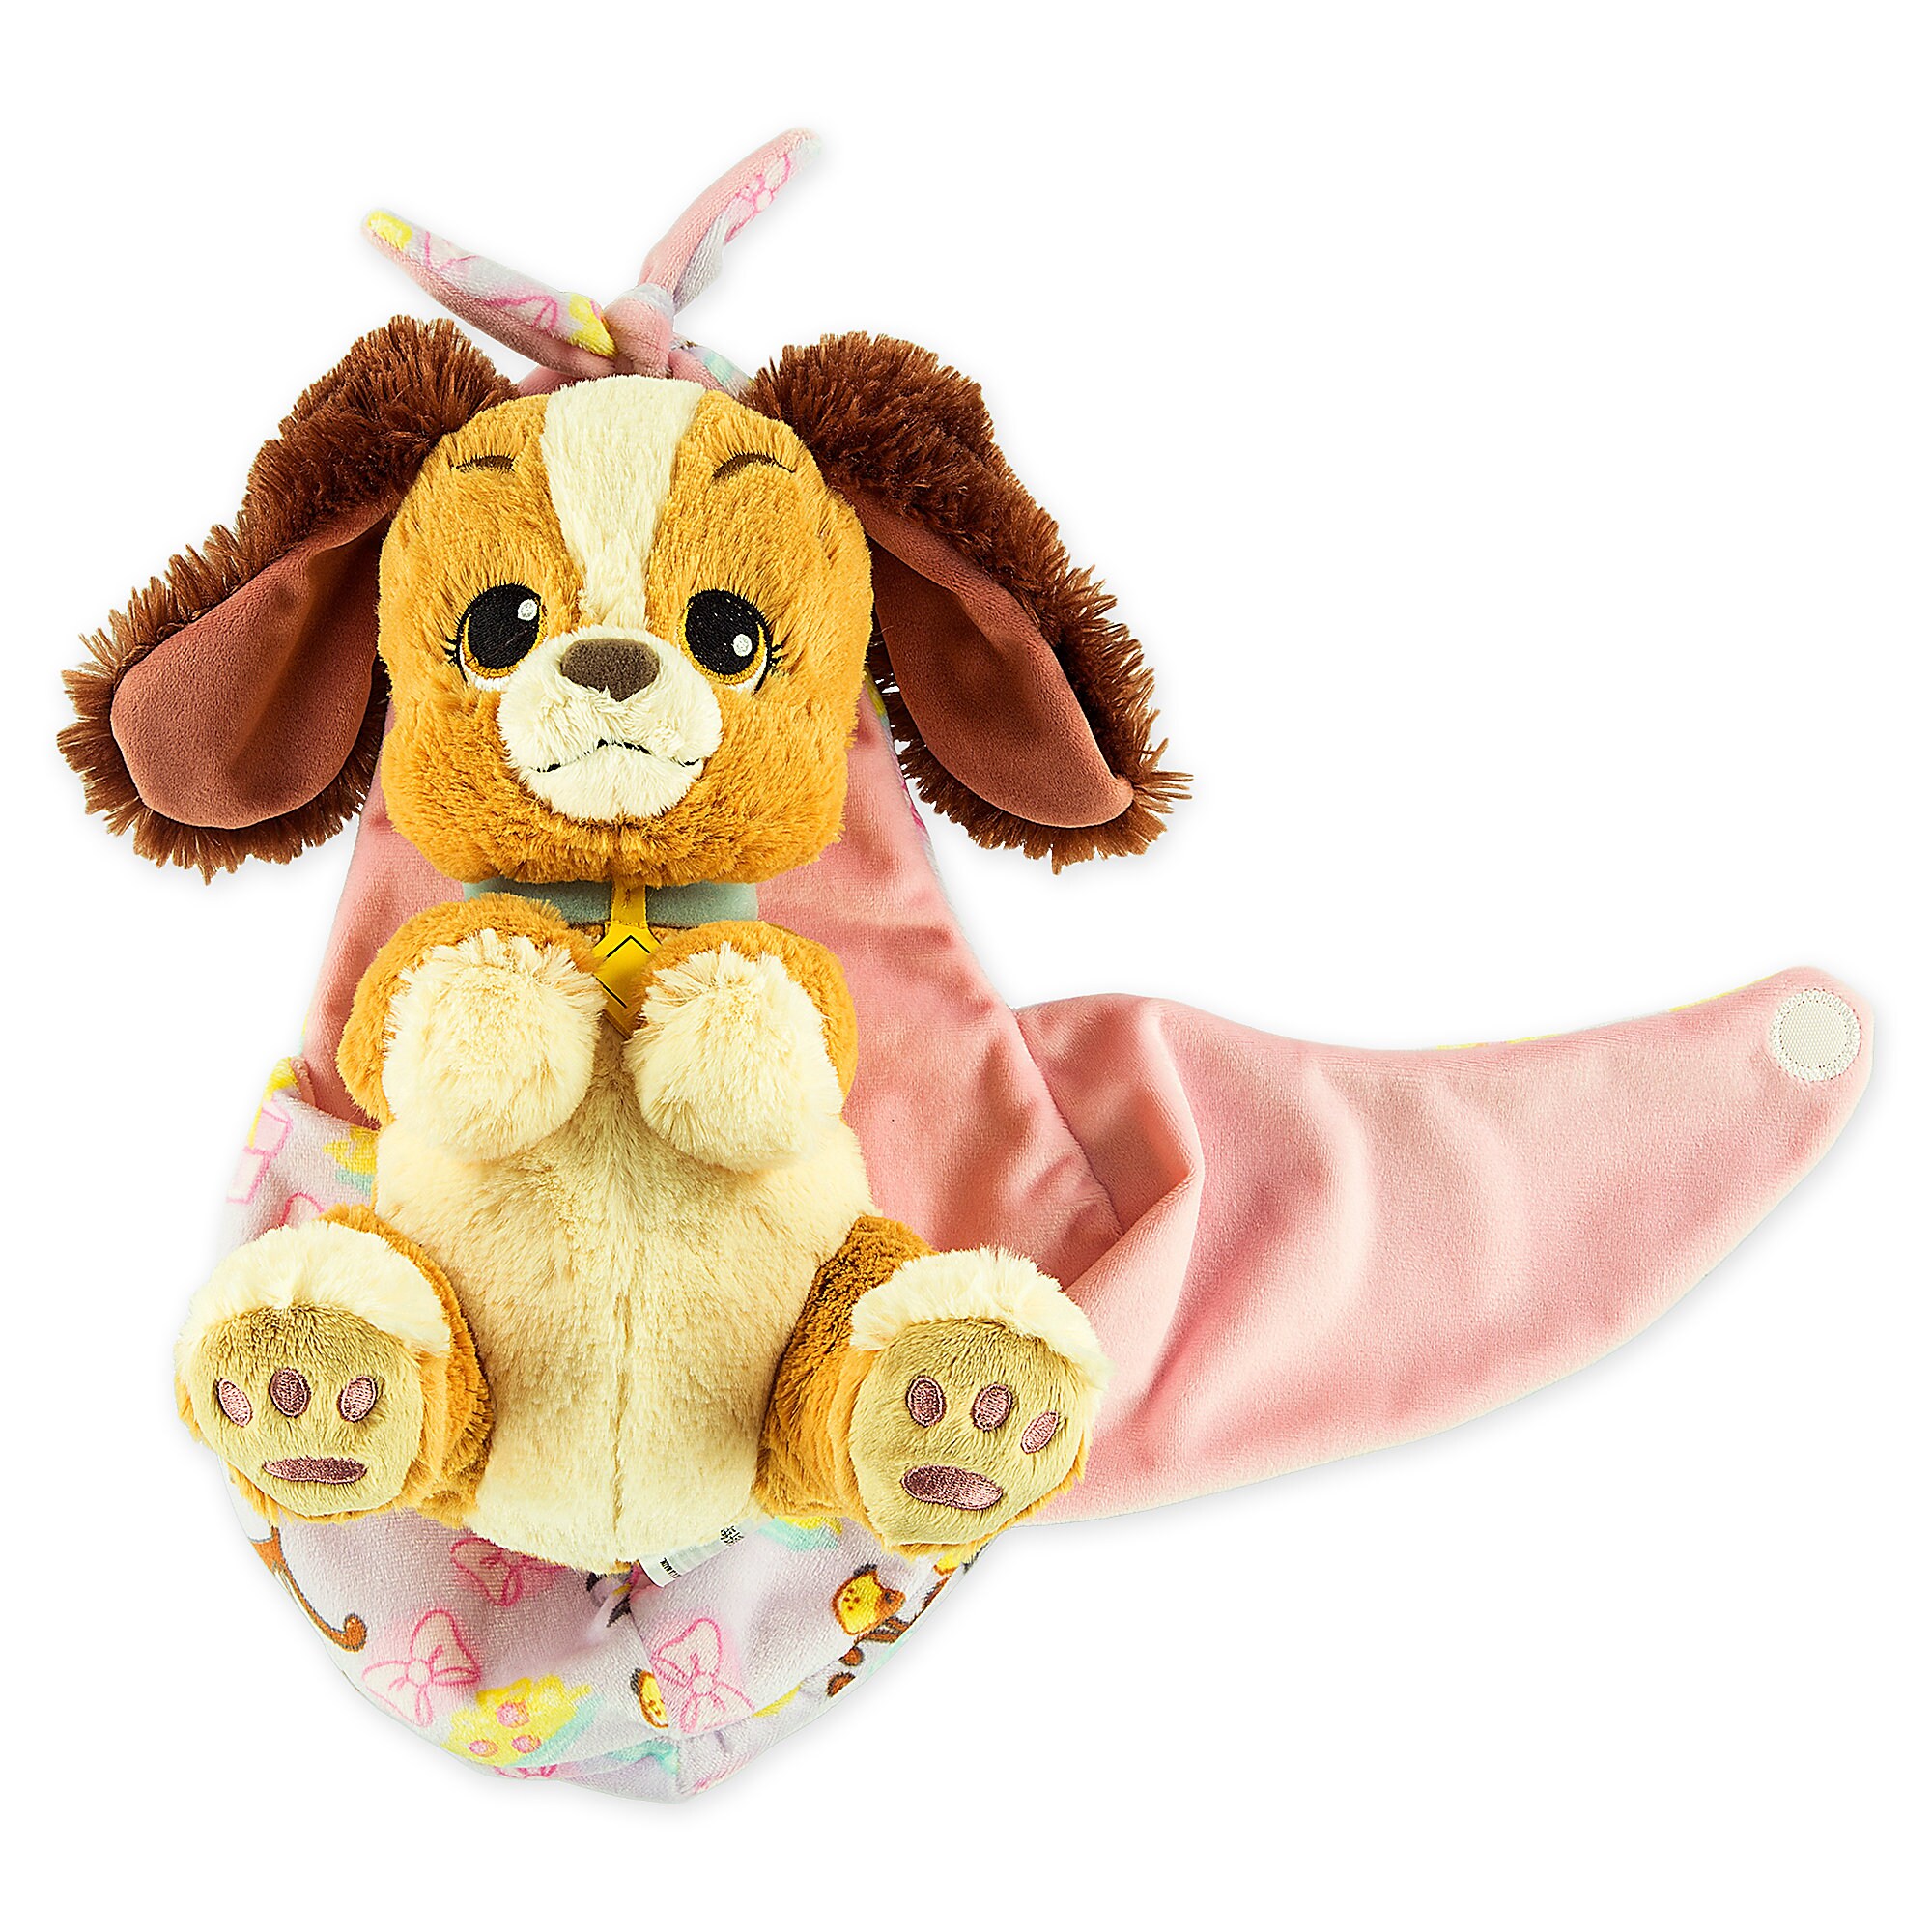 Lady Plush with Blanket Pouch - Disney's Babies - Small